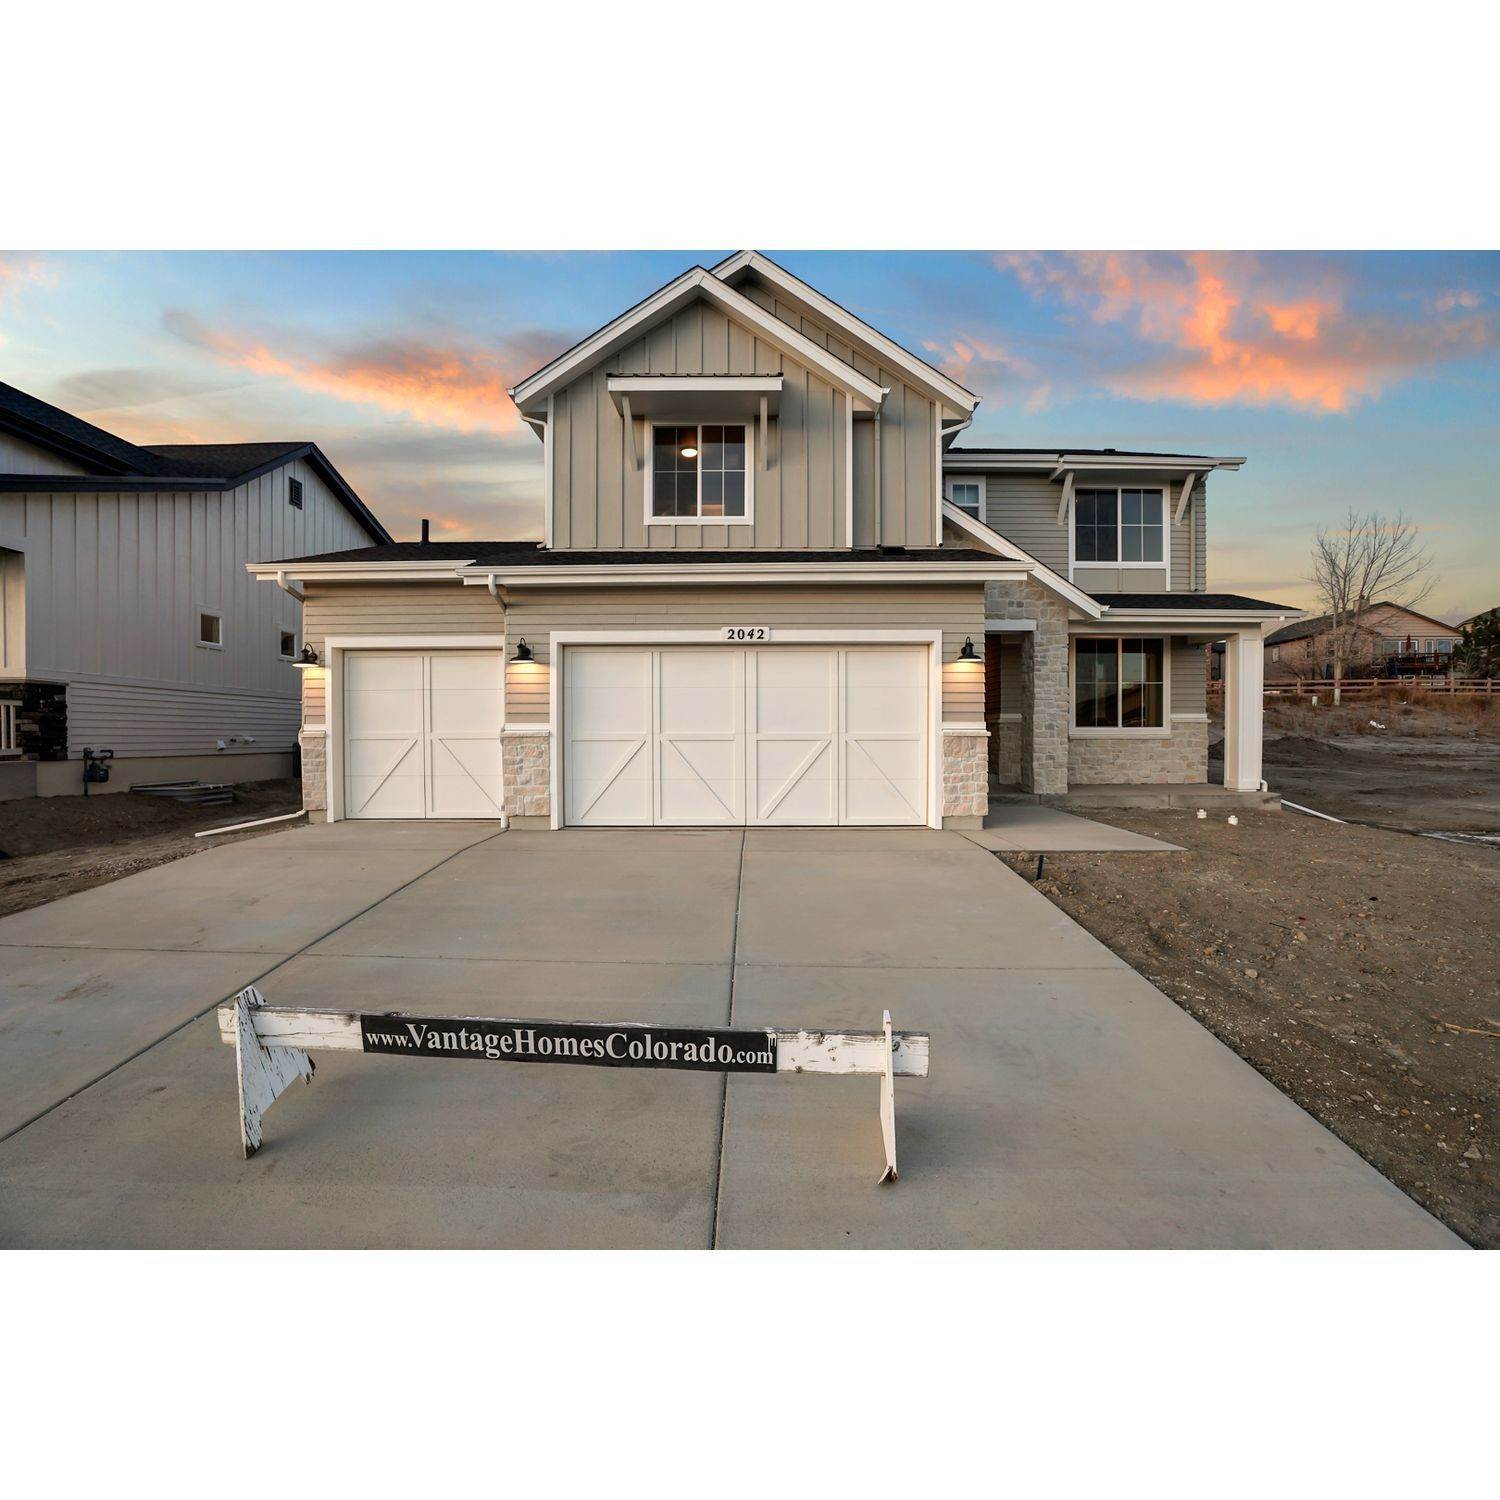 Single Family for Sale at Colorado Springs, CO 80921